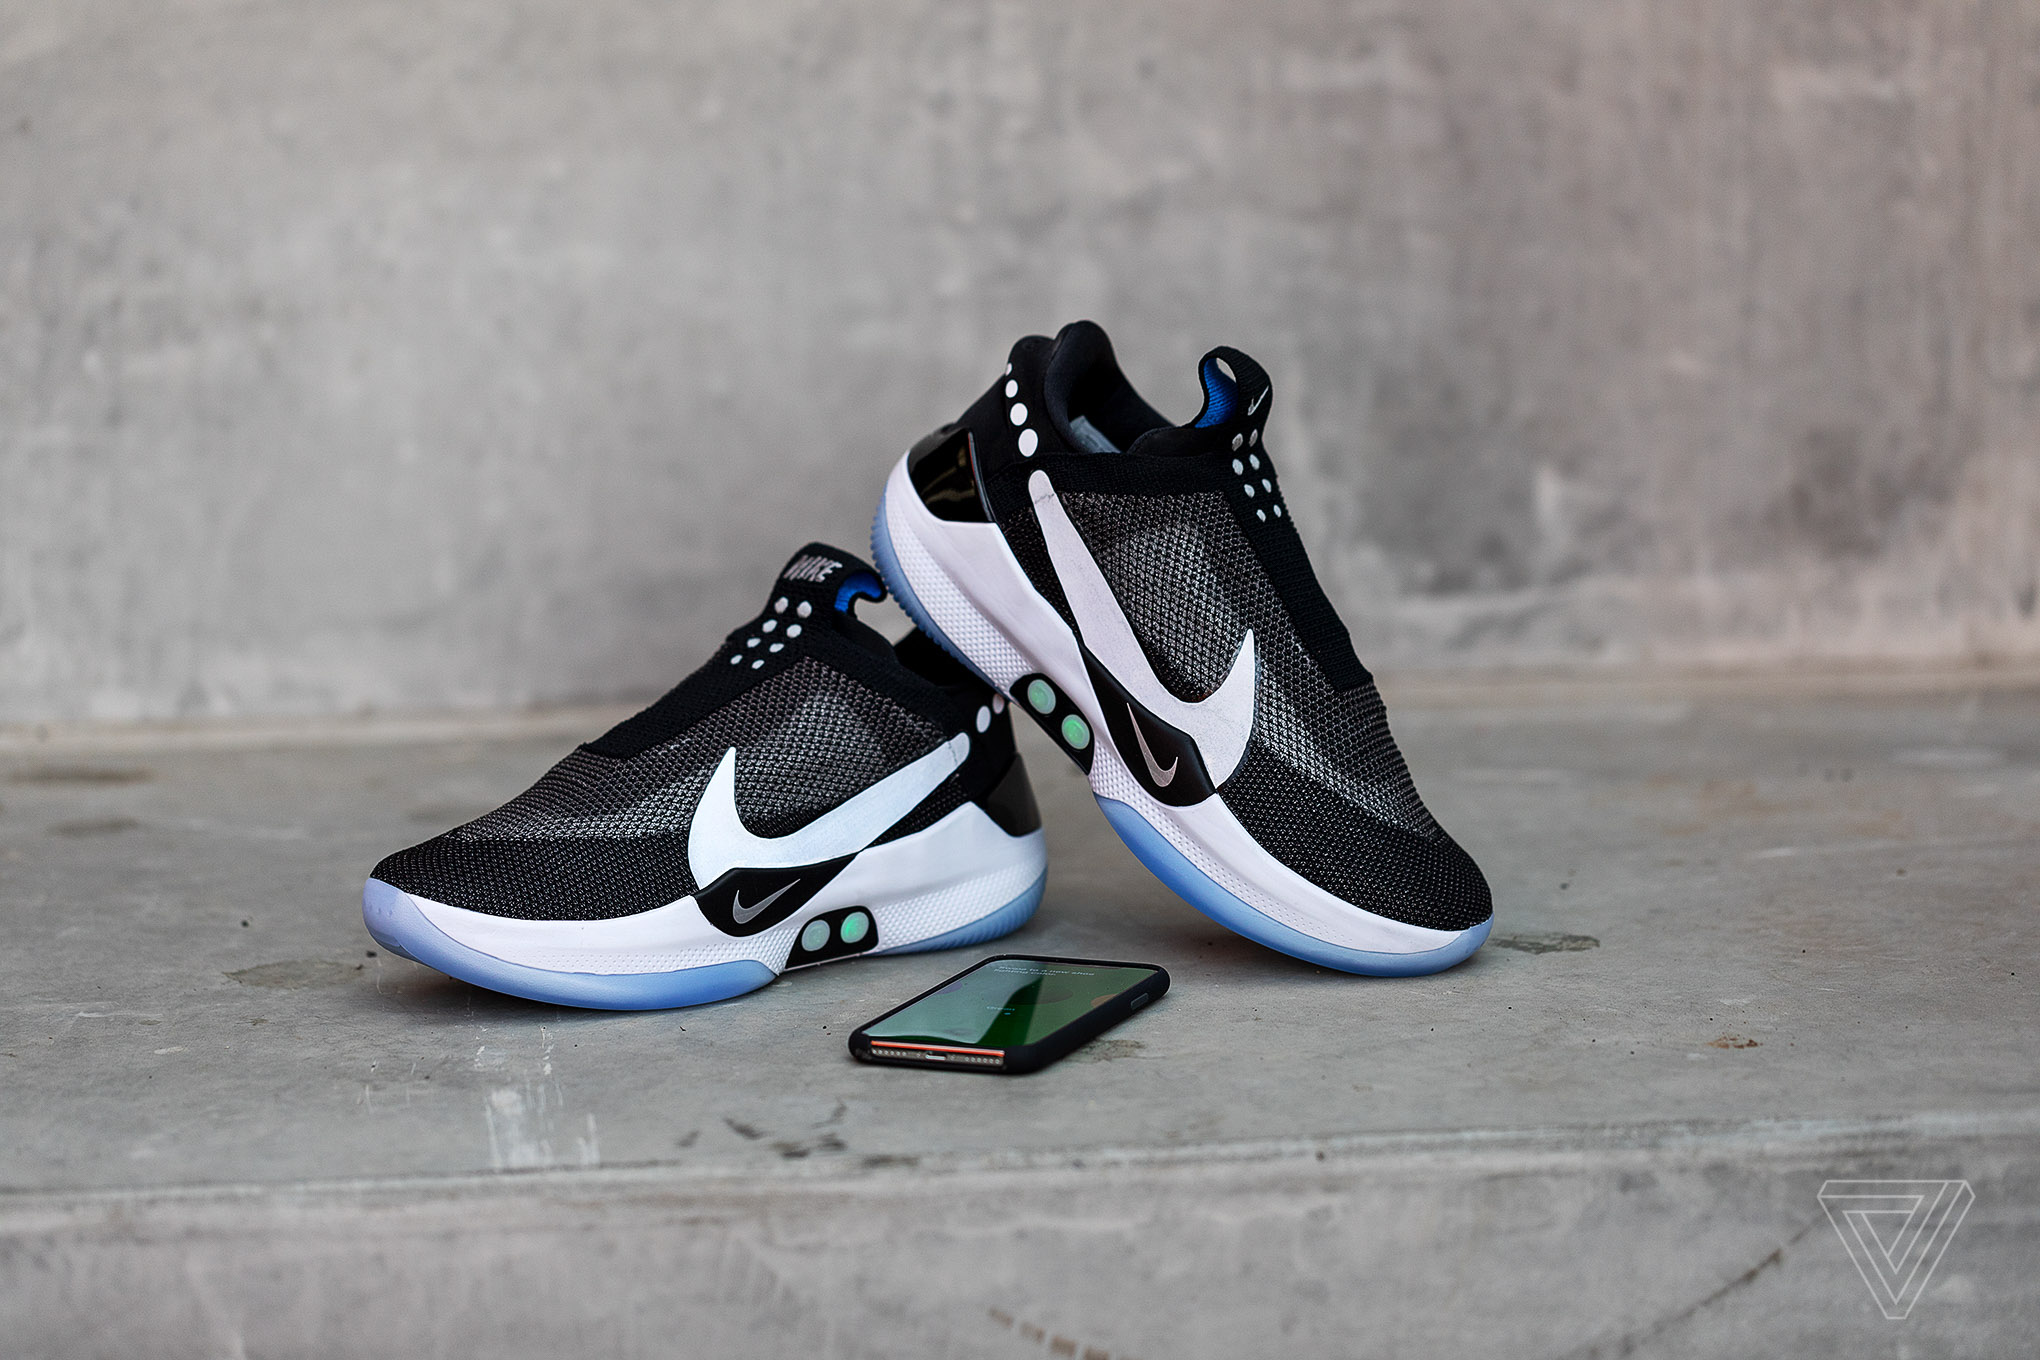 Cabaña embotellamiento ritmo Nike's Adapt BB self-lacing sneakers let you tie your shoes from an app -  The Verge